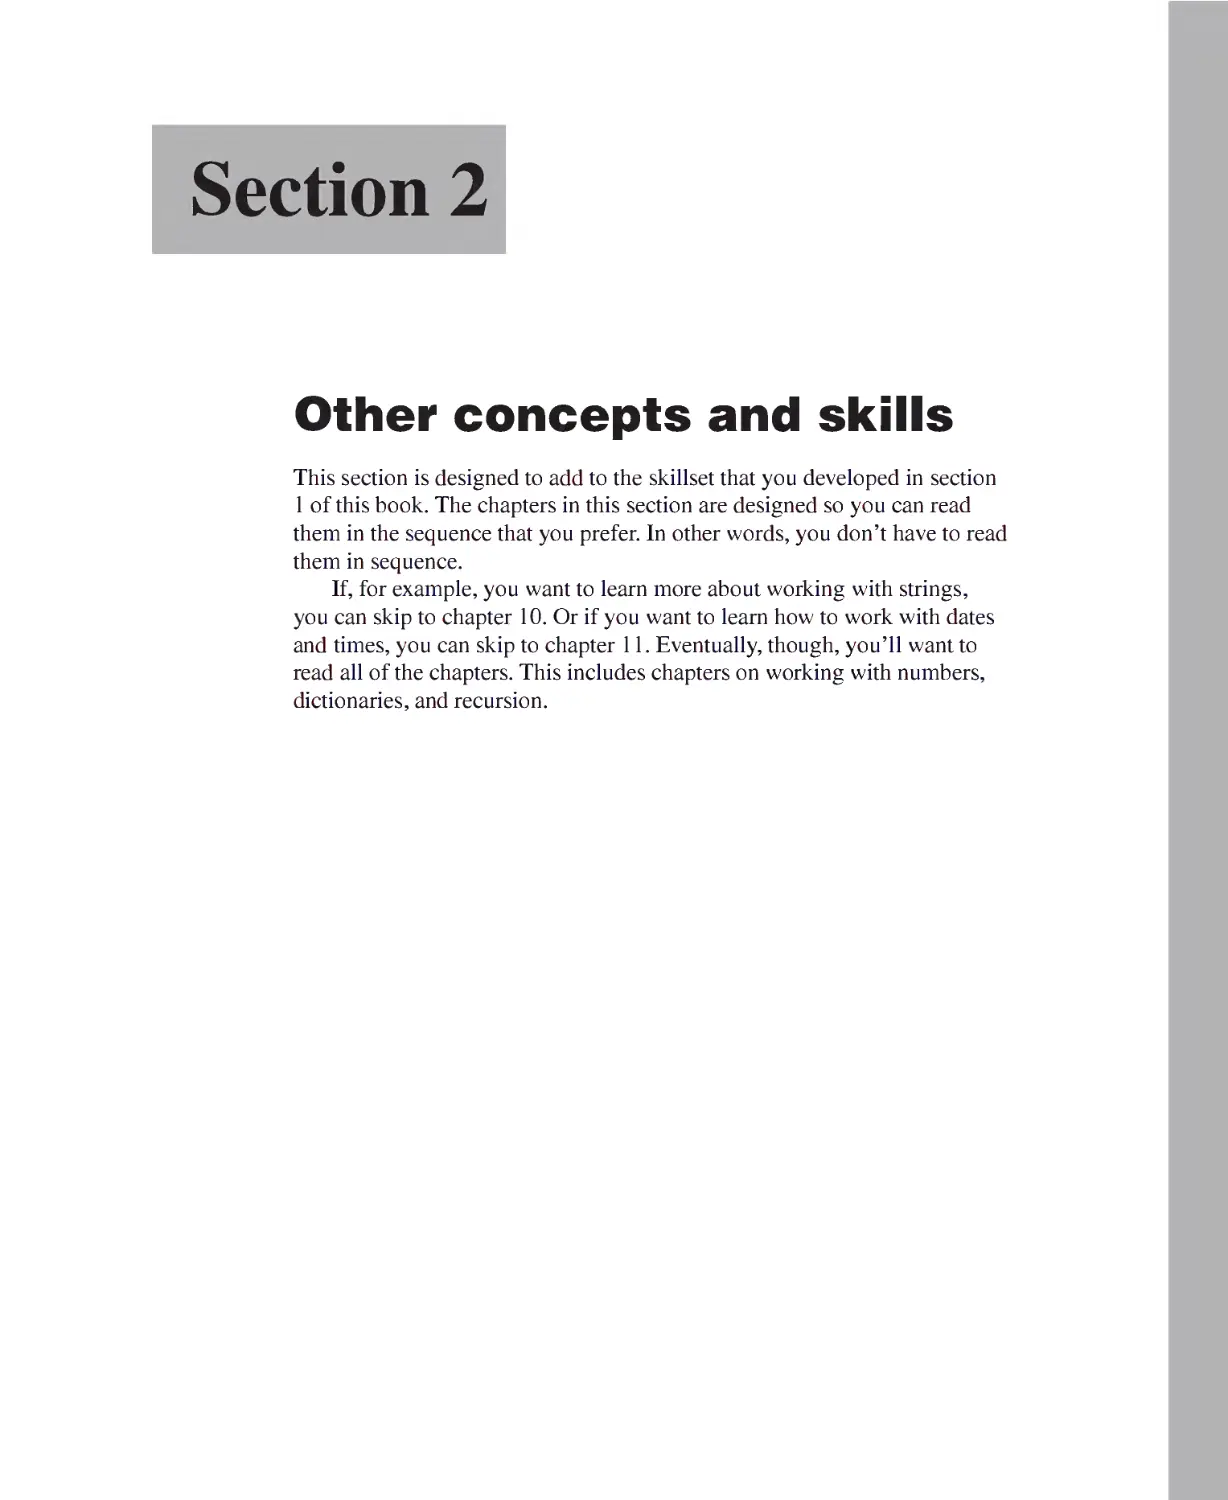 Section 2 - Other Concepts and Skills